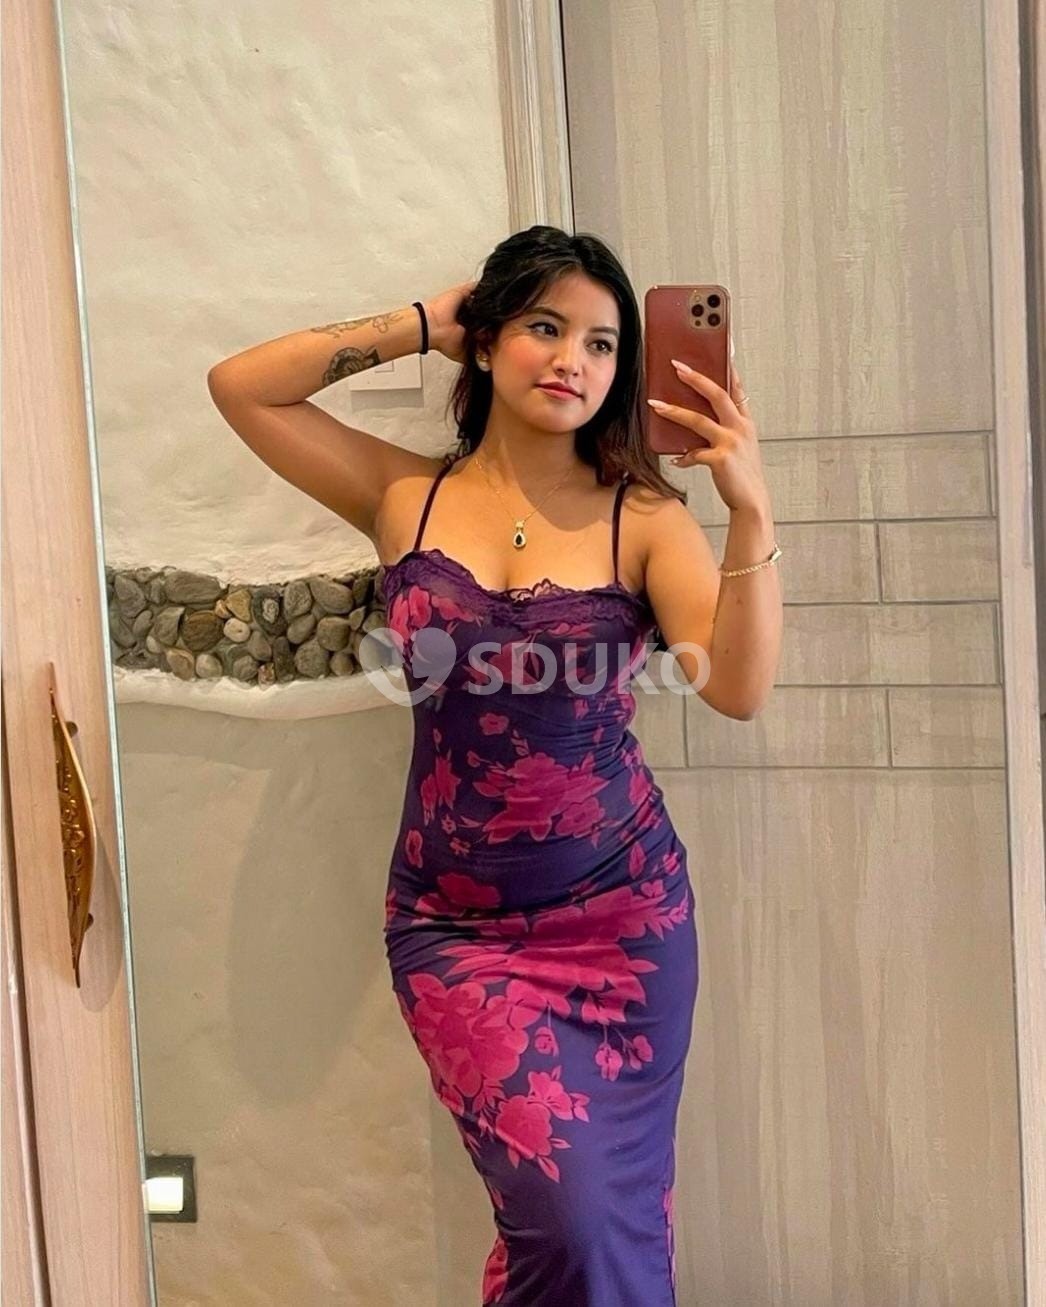 My self dipti sharma genuine service provider 100% SAFE AND SECURE TODAY LOW PRICE UNLIMITED ENJOY HOT COLLEGE GIRL HOUS